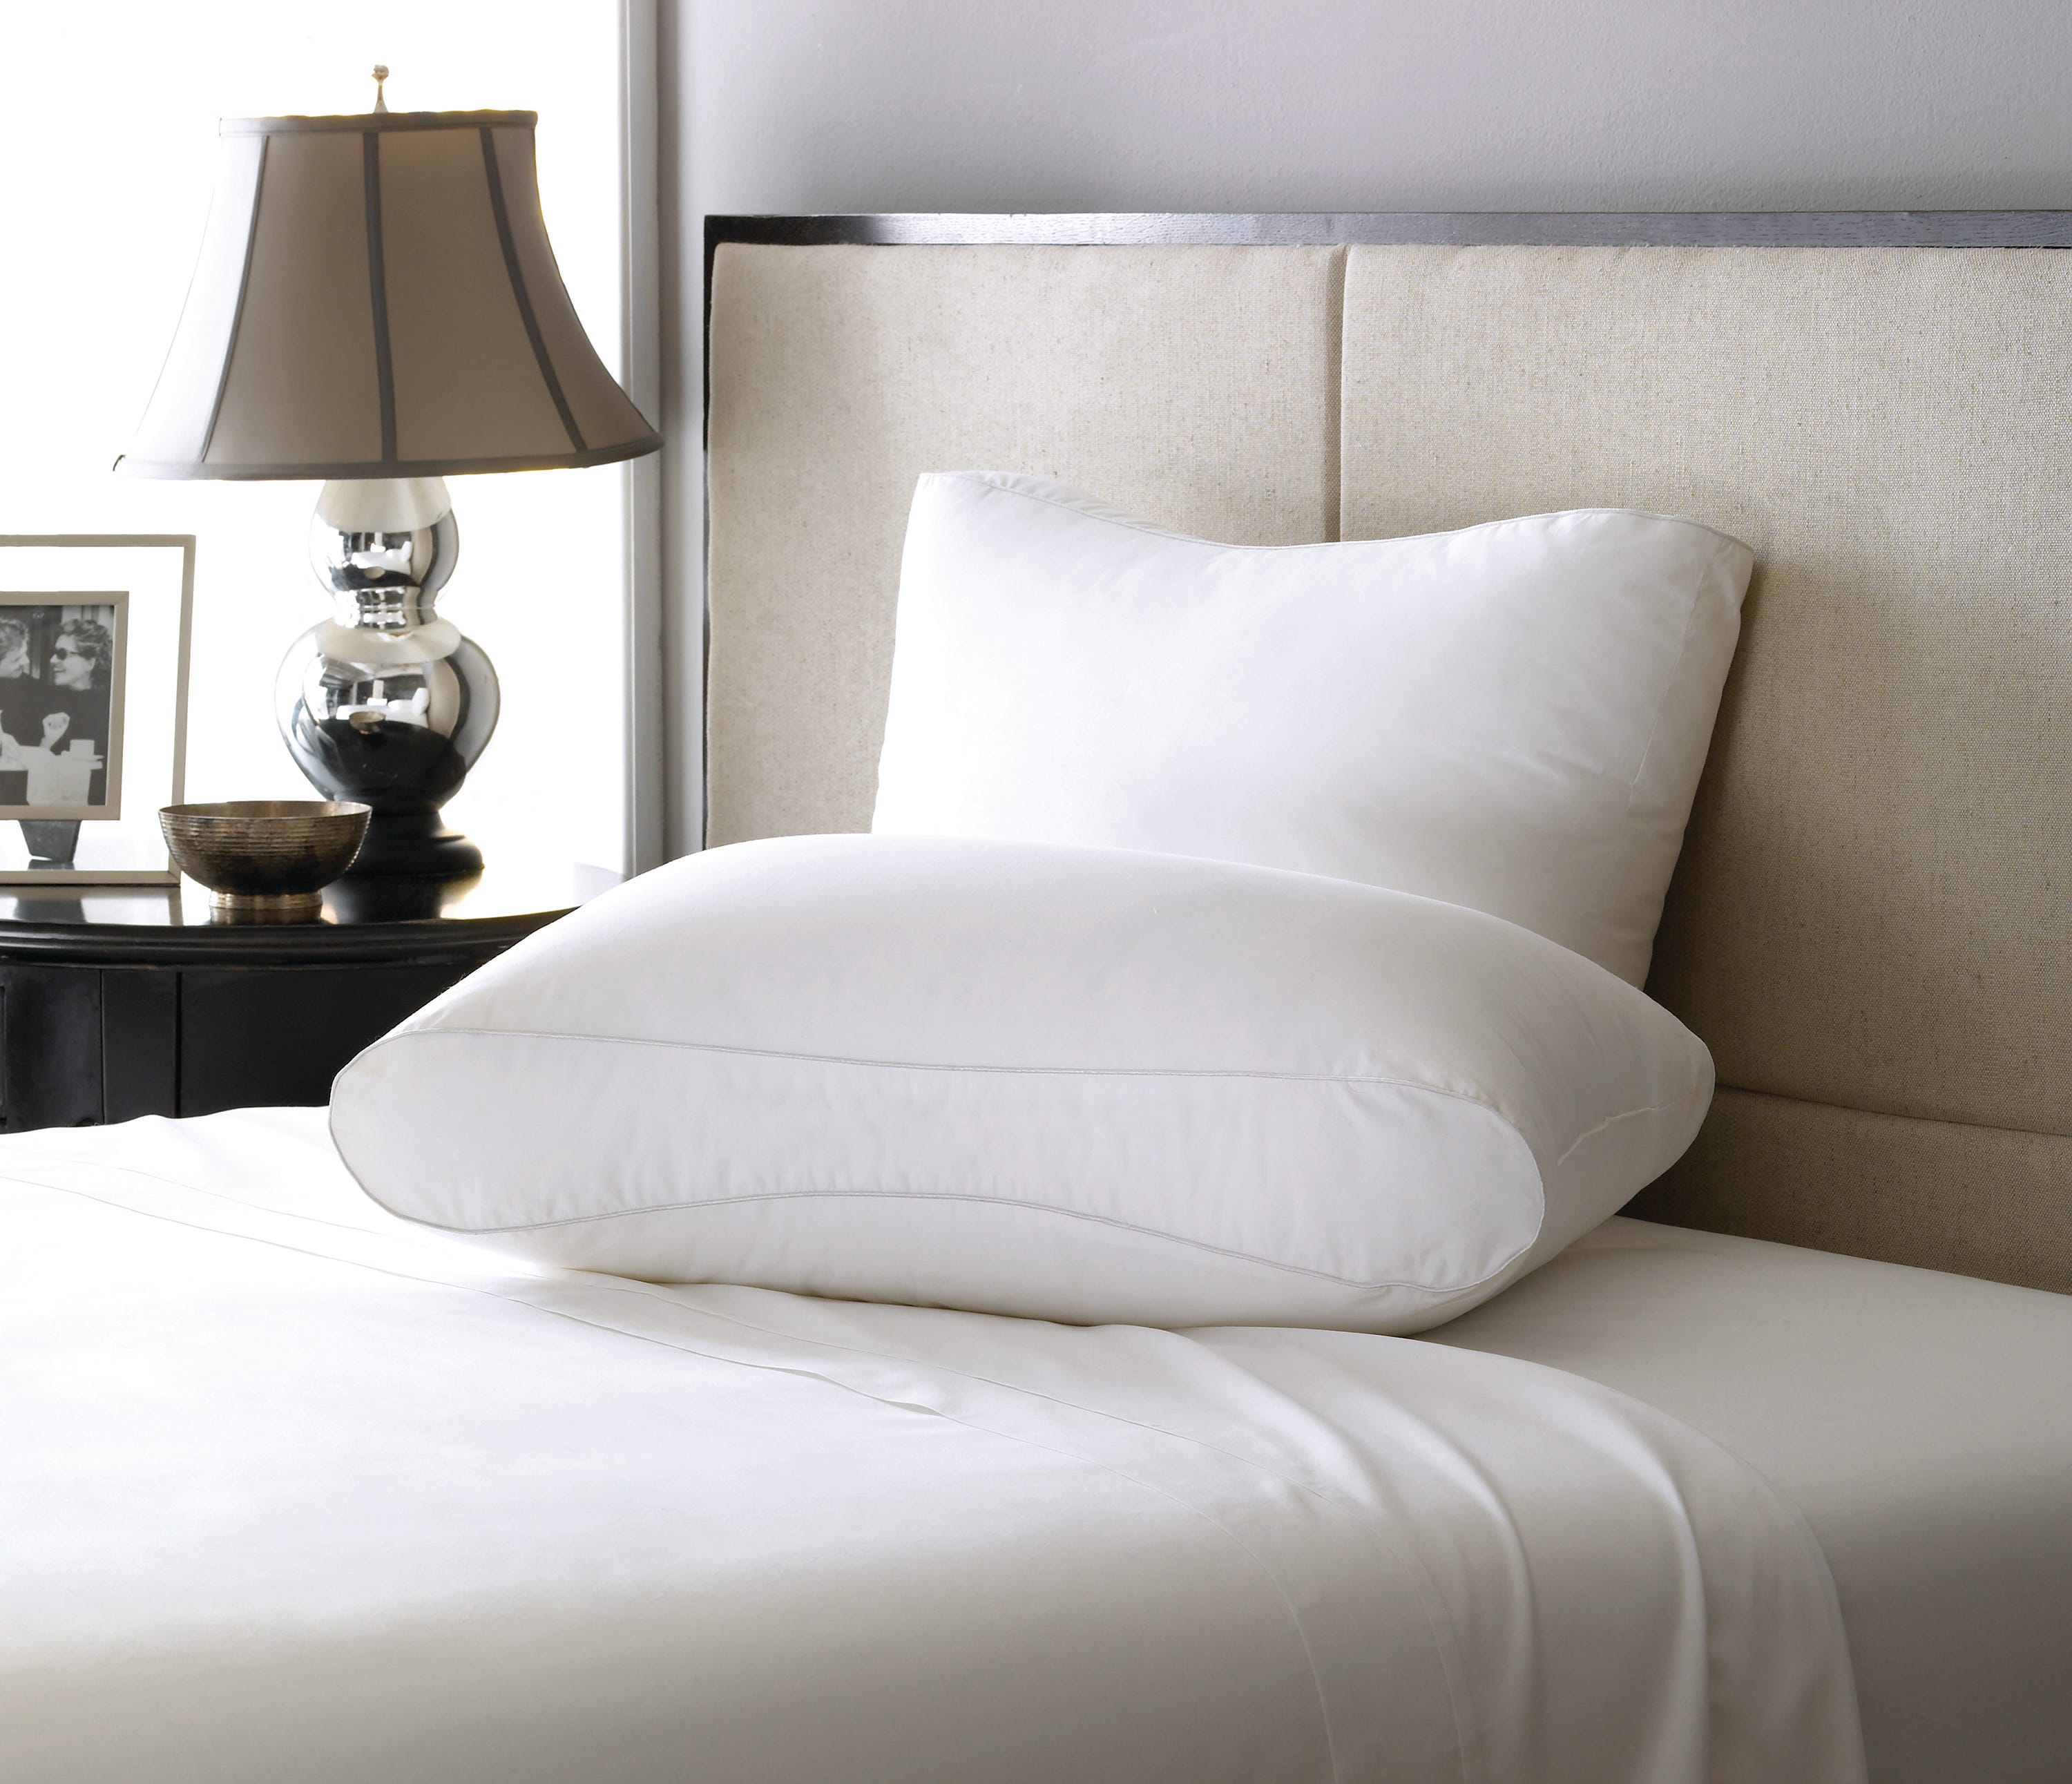 purchase hotel pillows